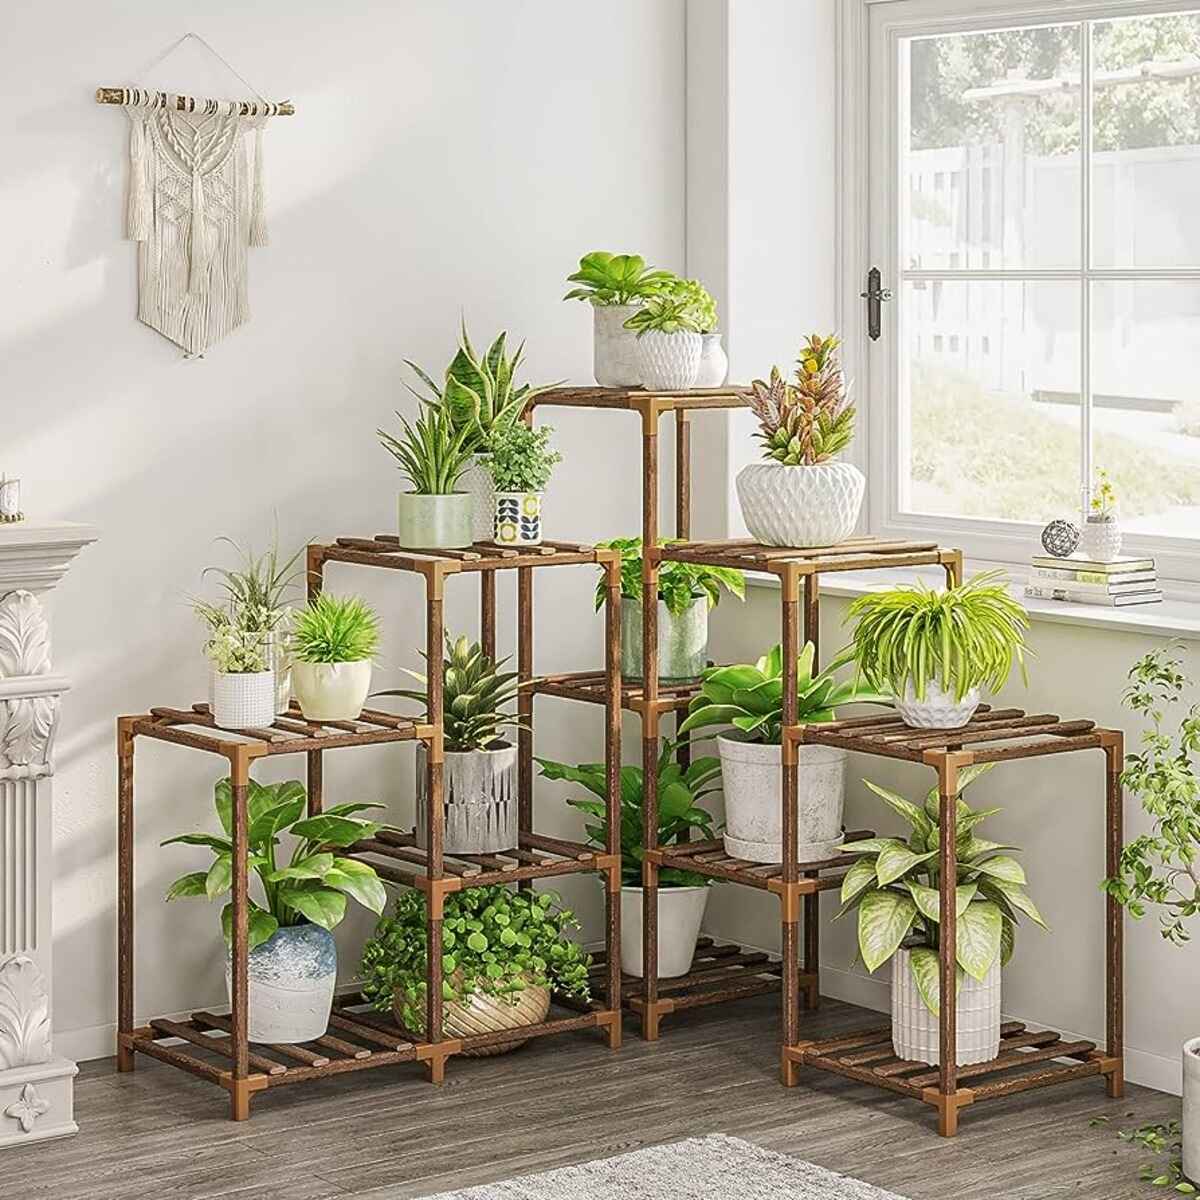 13 Incredible Plant Shelf for 2023